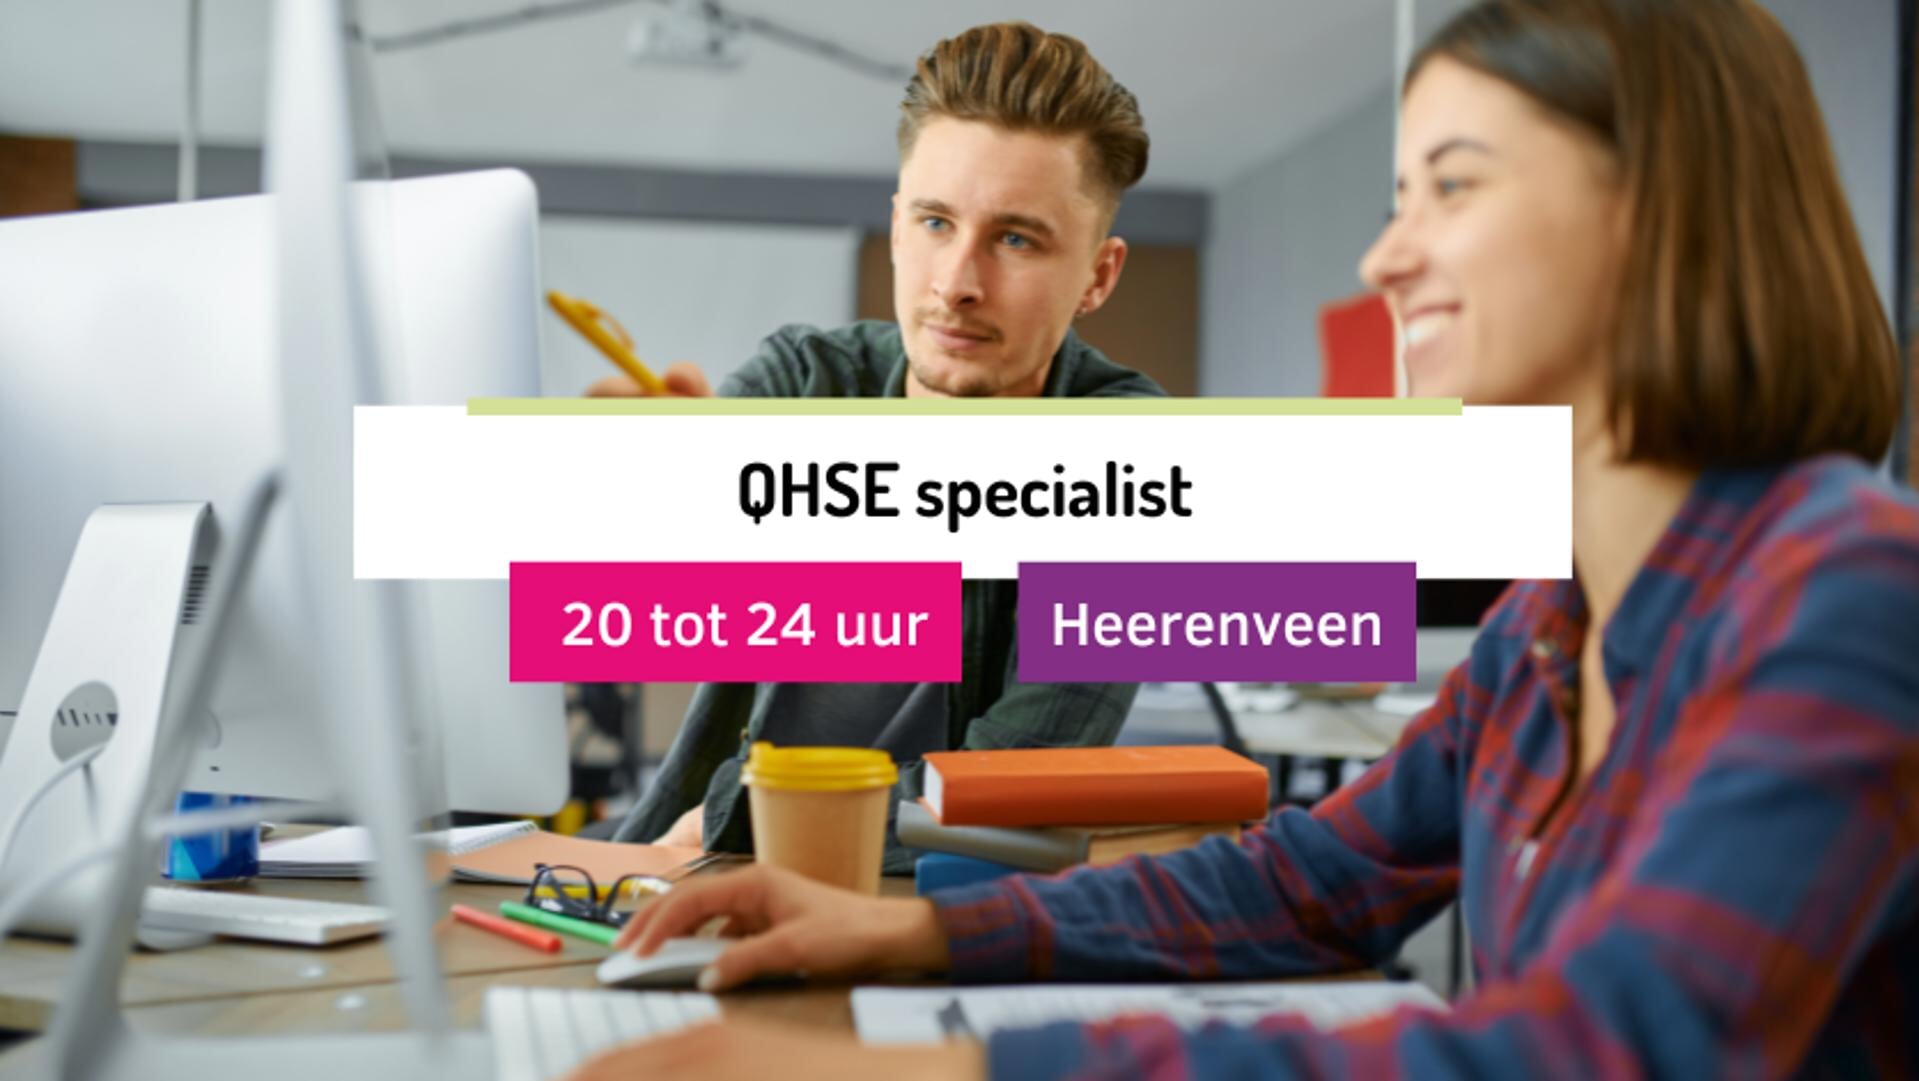 QHSE specialist